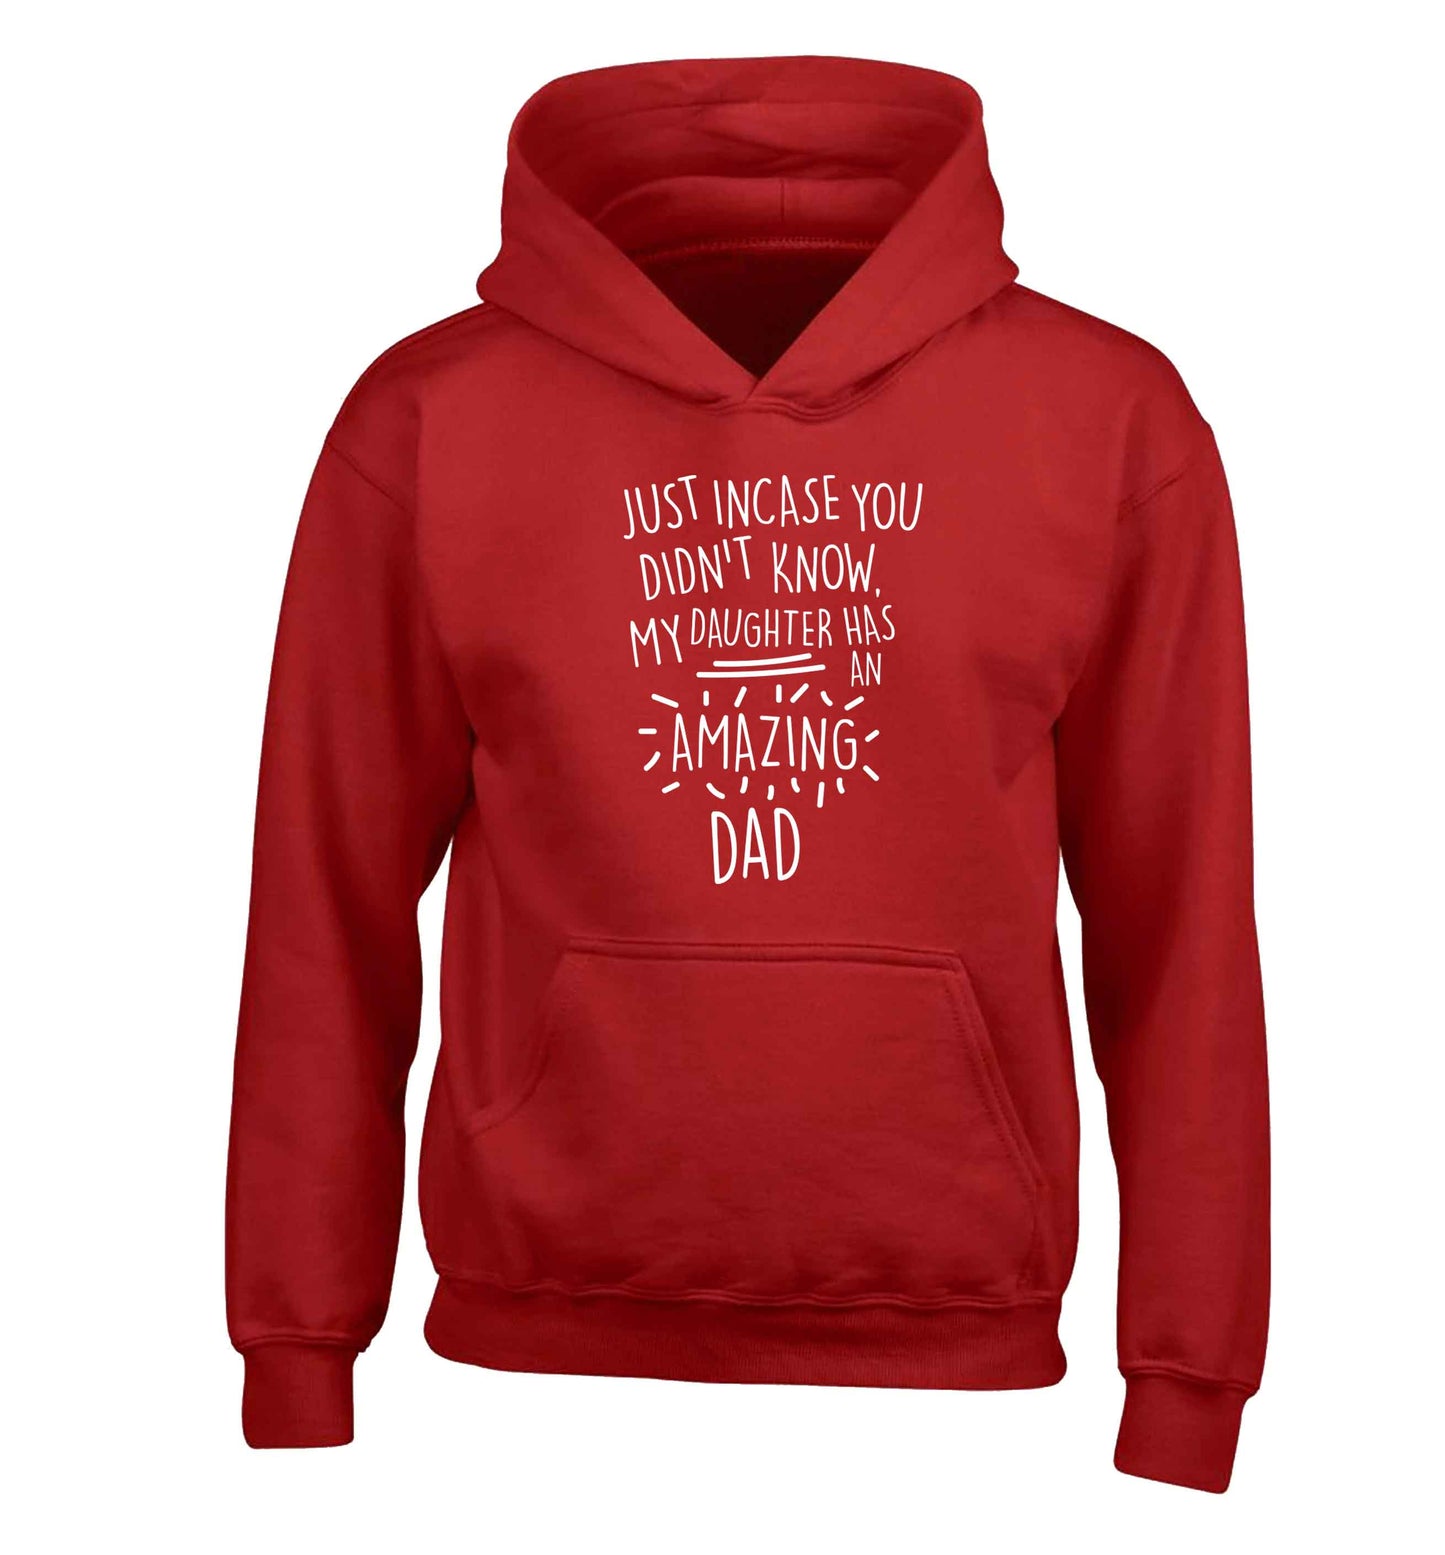 Just incase you didn't know my daughter has an amazing dad children's red hoodie 12-13 Years